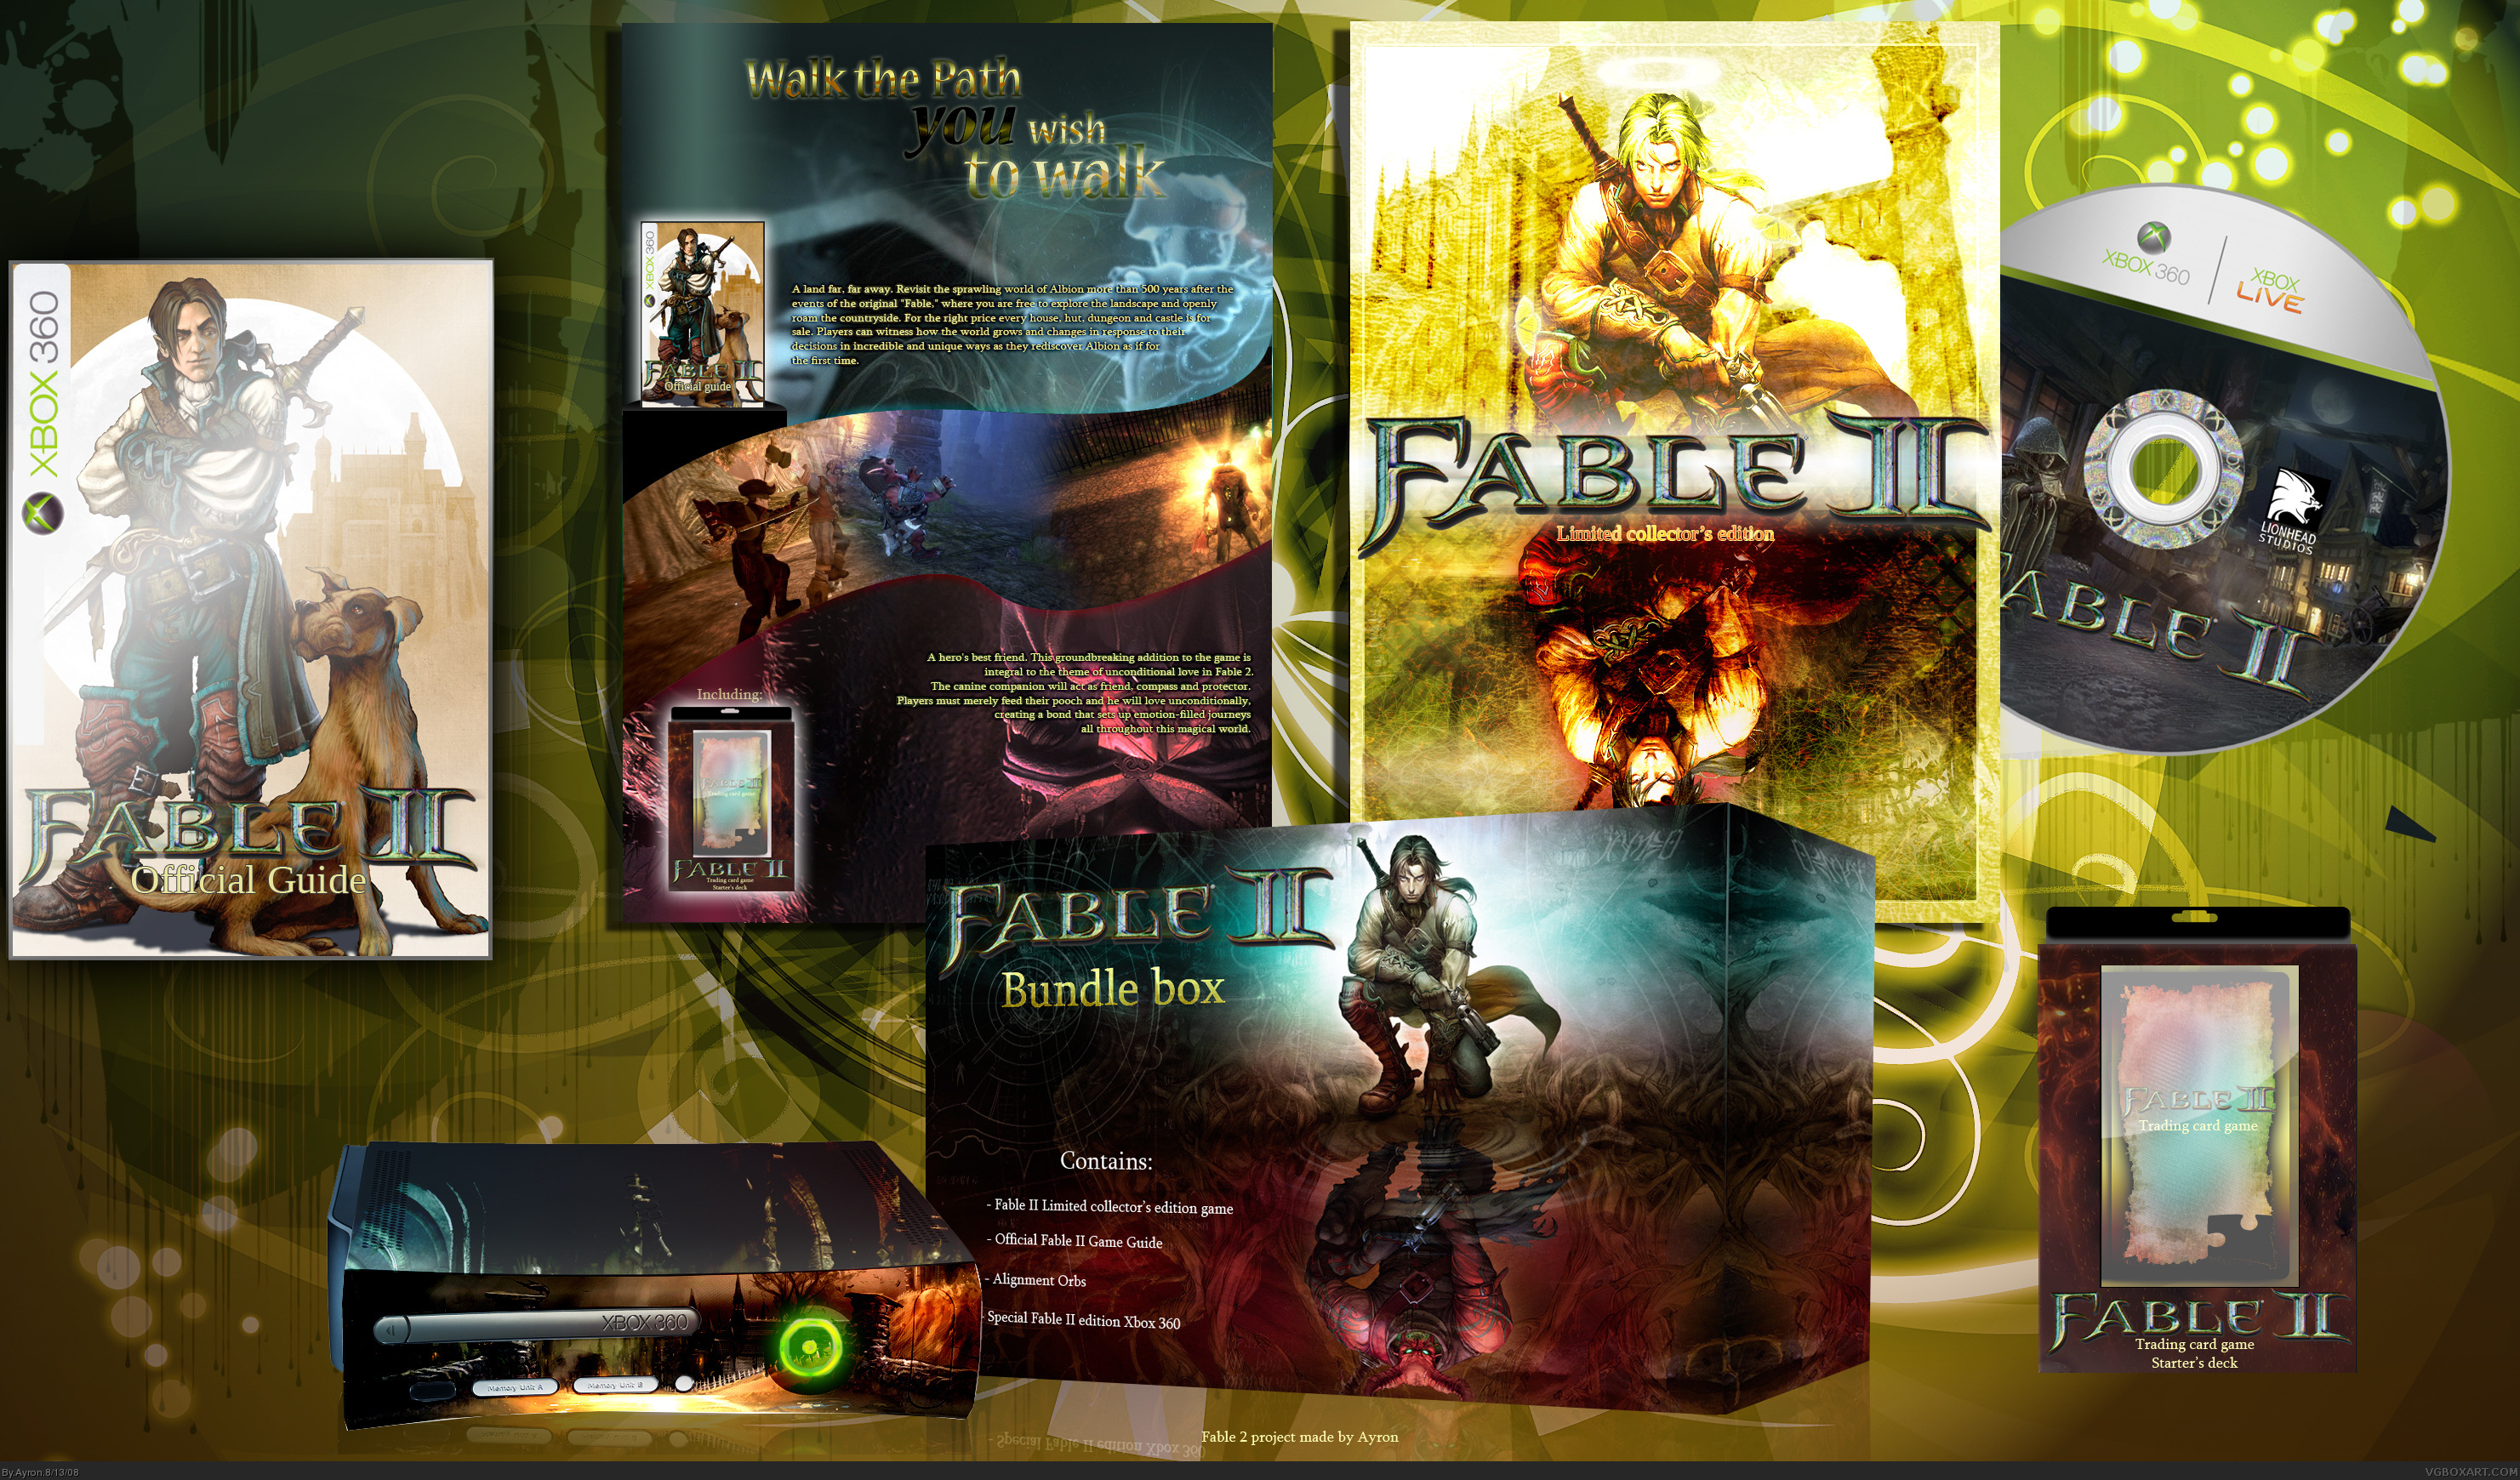 Fable II Limited Collector's Edition Bundle Box box cover